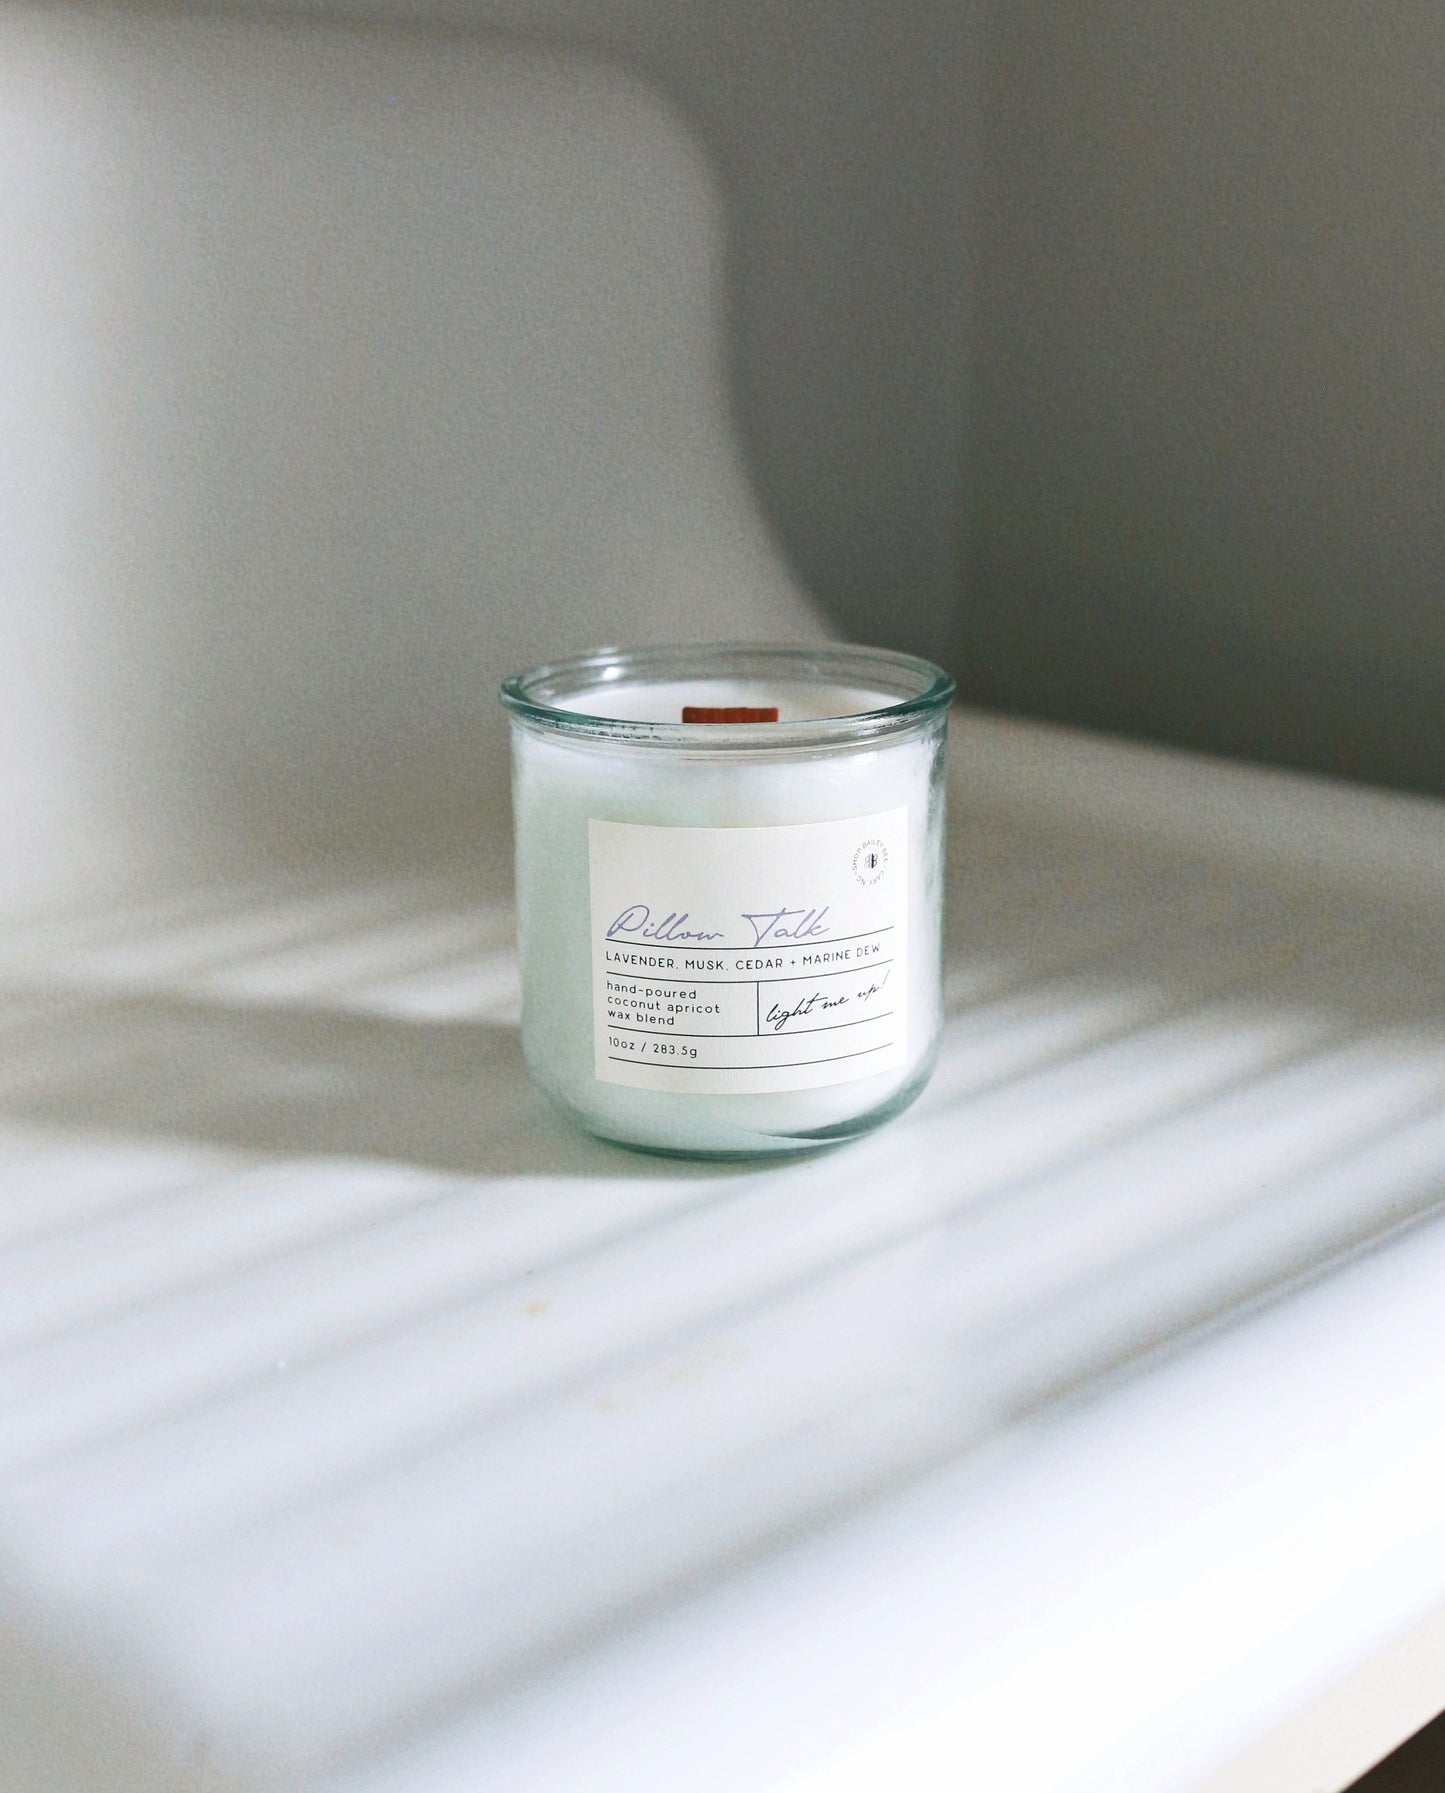 Pillow Talk Classic candle in laundry room